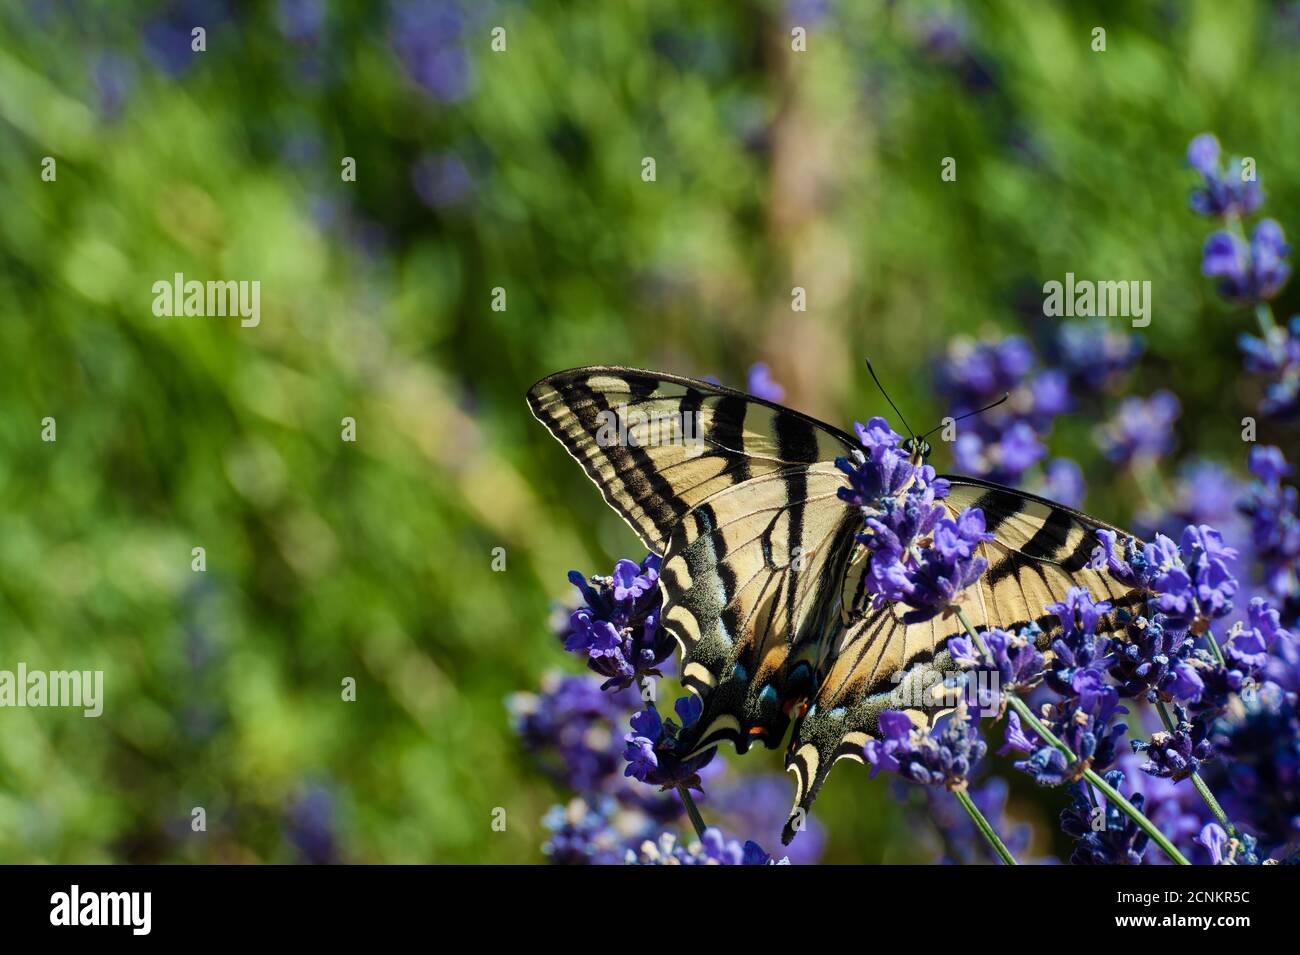 The underside of a Anise Swallowtail butterfly on a purple flower. Stock Photo